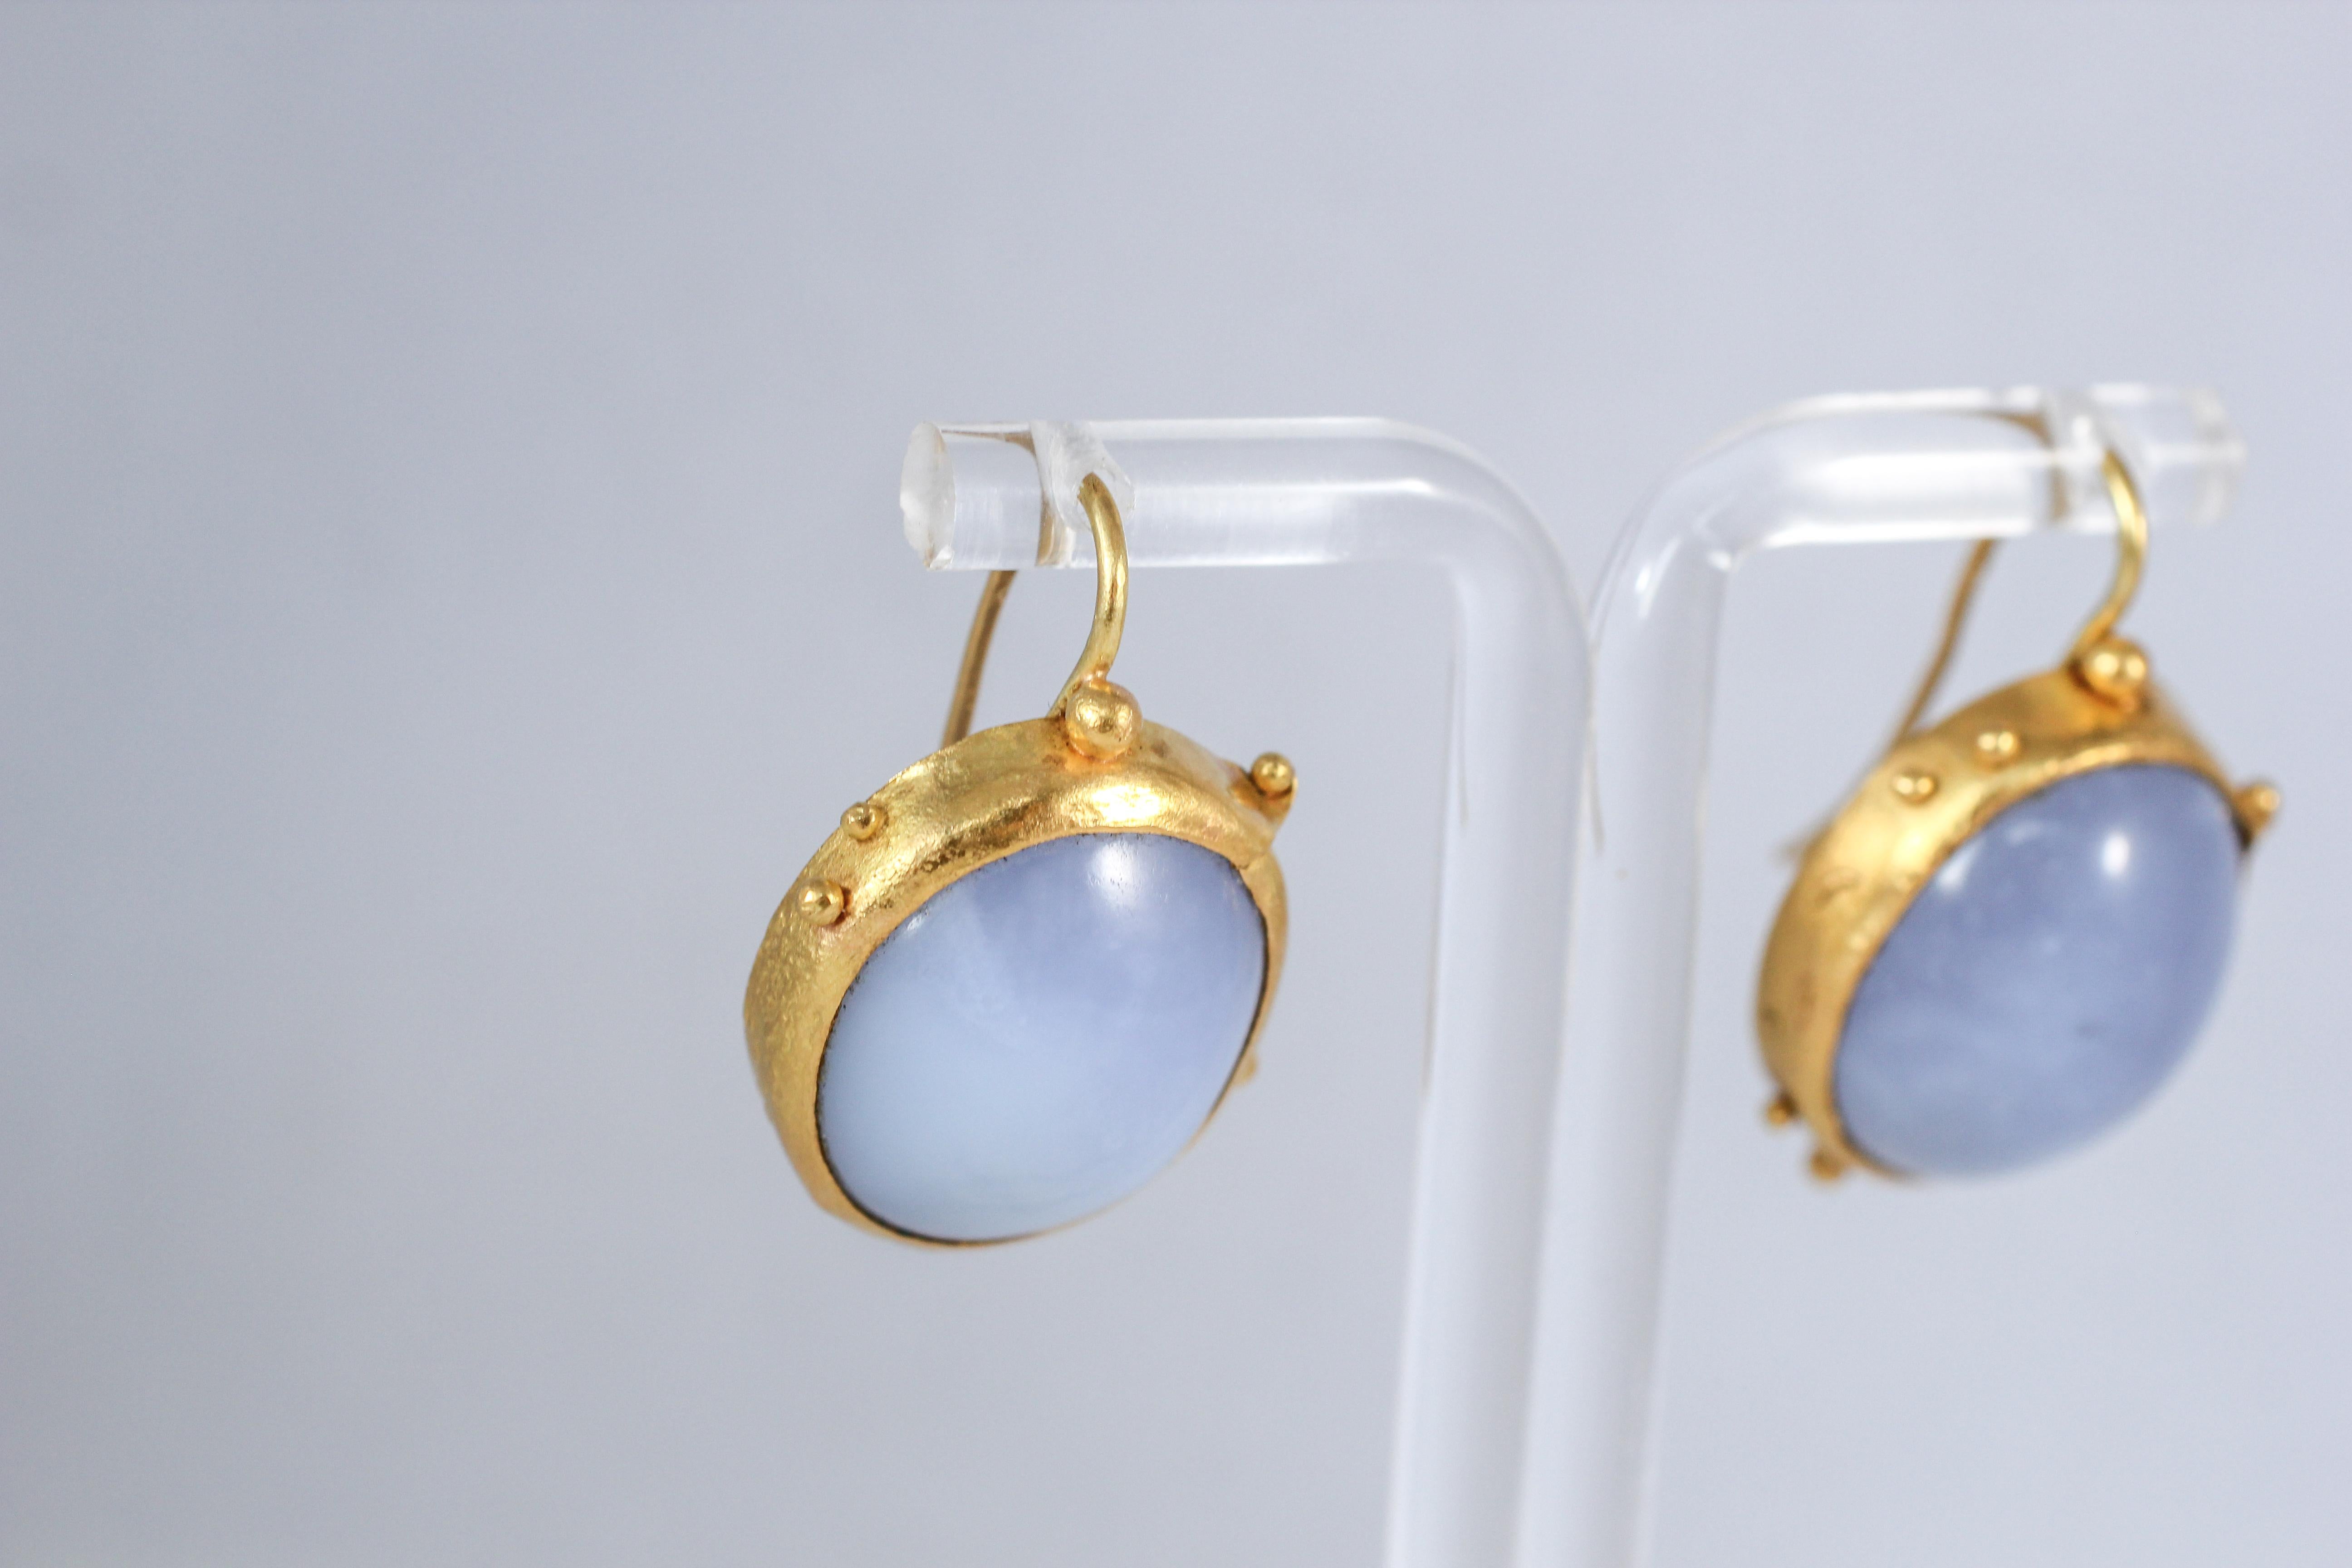 Summer Sky earrings. These subtle purple-blue chalcedony and 22k gold drop earrings will make an elegant addition to any outfit. They are very comfortable and are easy to coordinate for everyday wear. Slightly asymmetrical.

The inspiration for